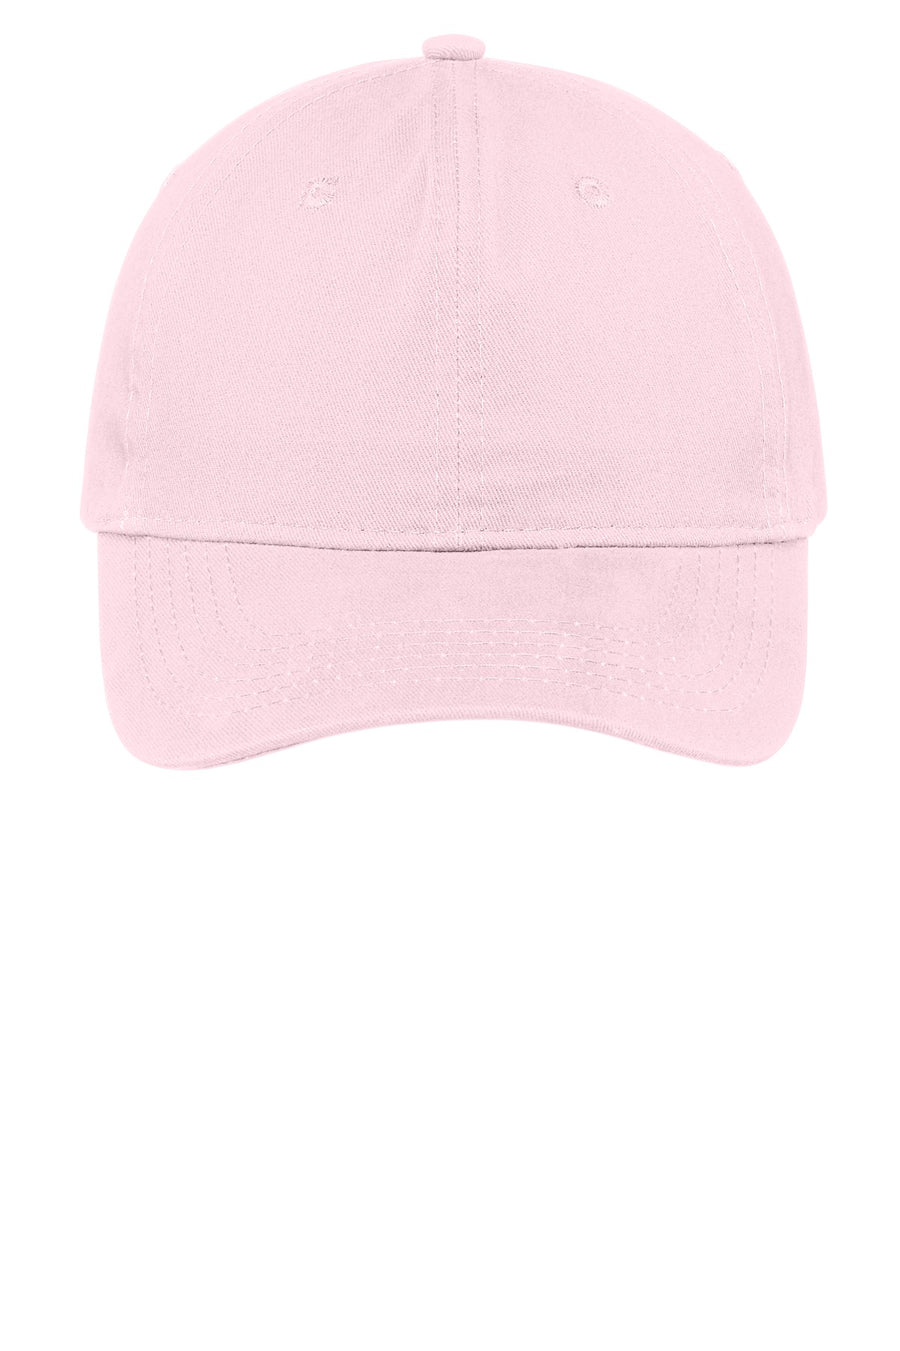 CP77-Light Pink-front_flat